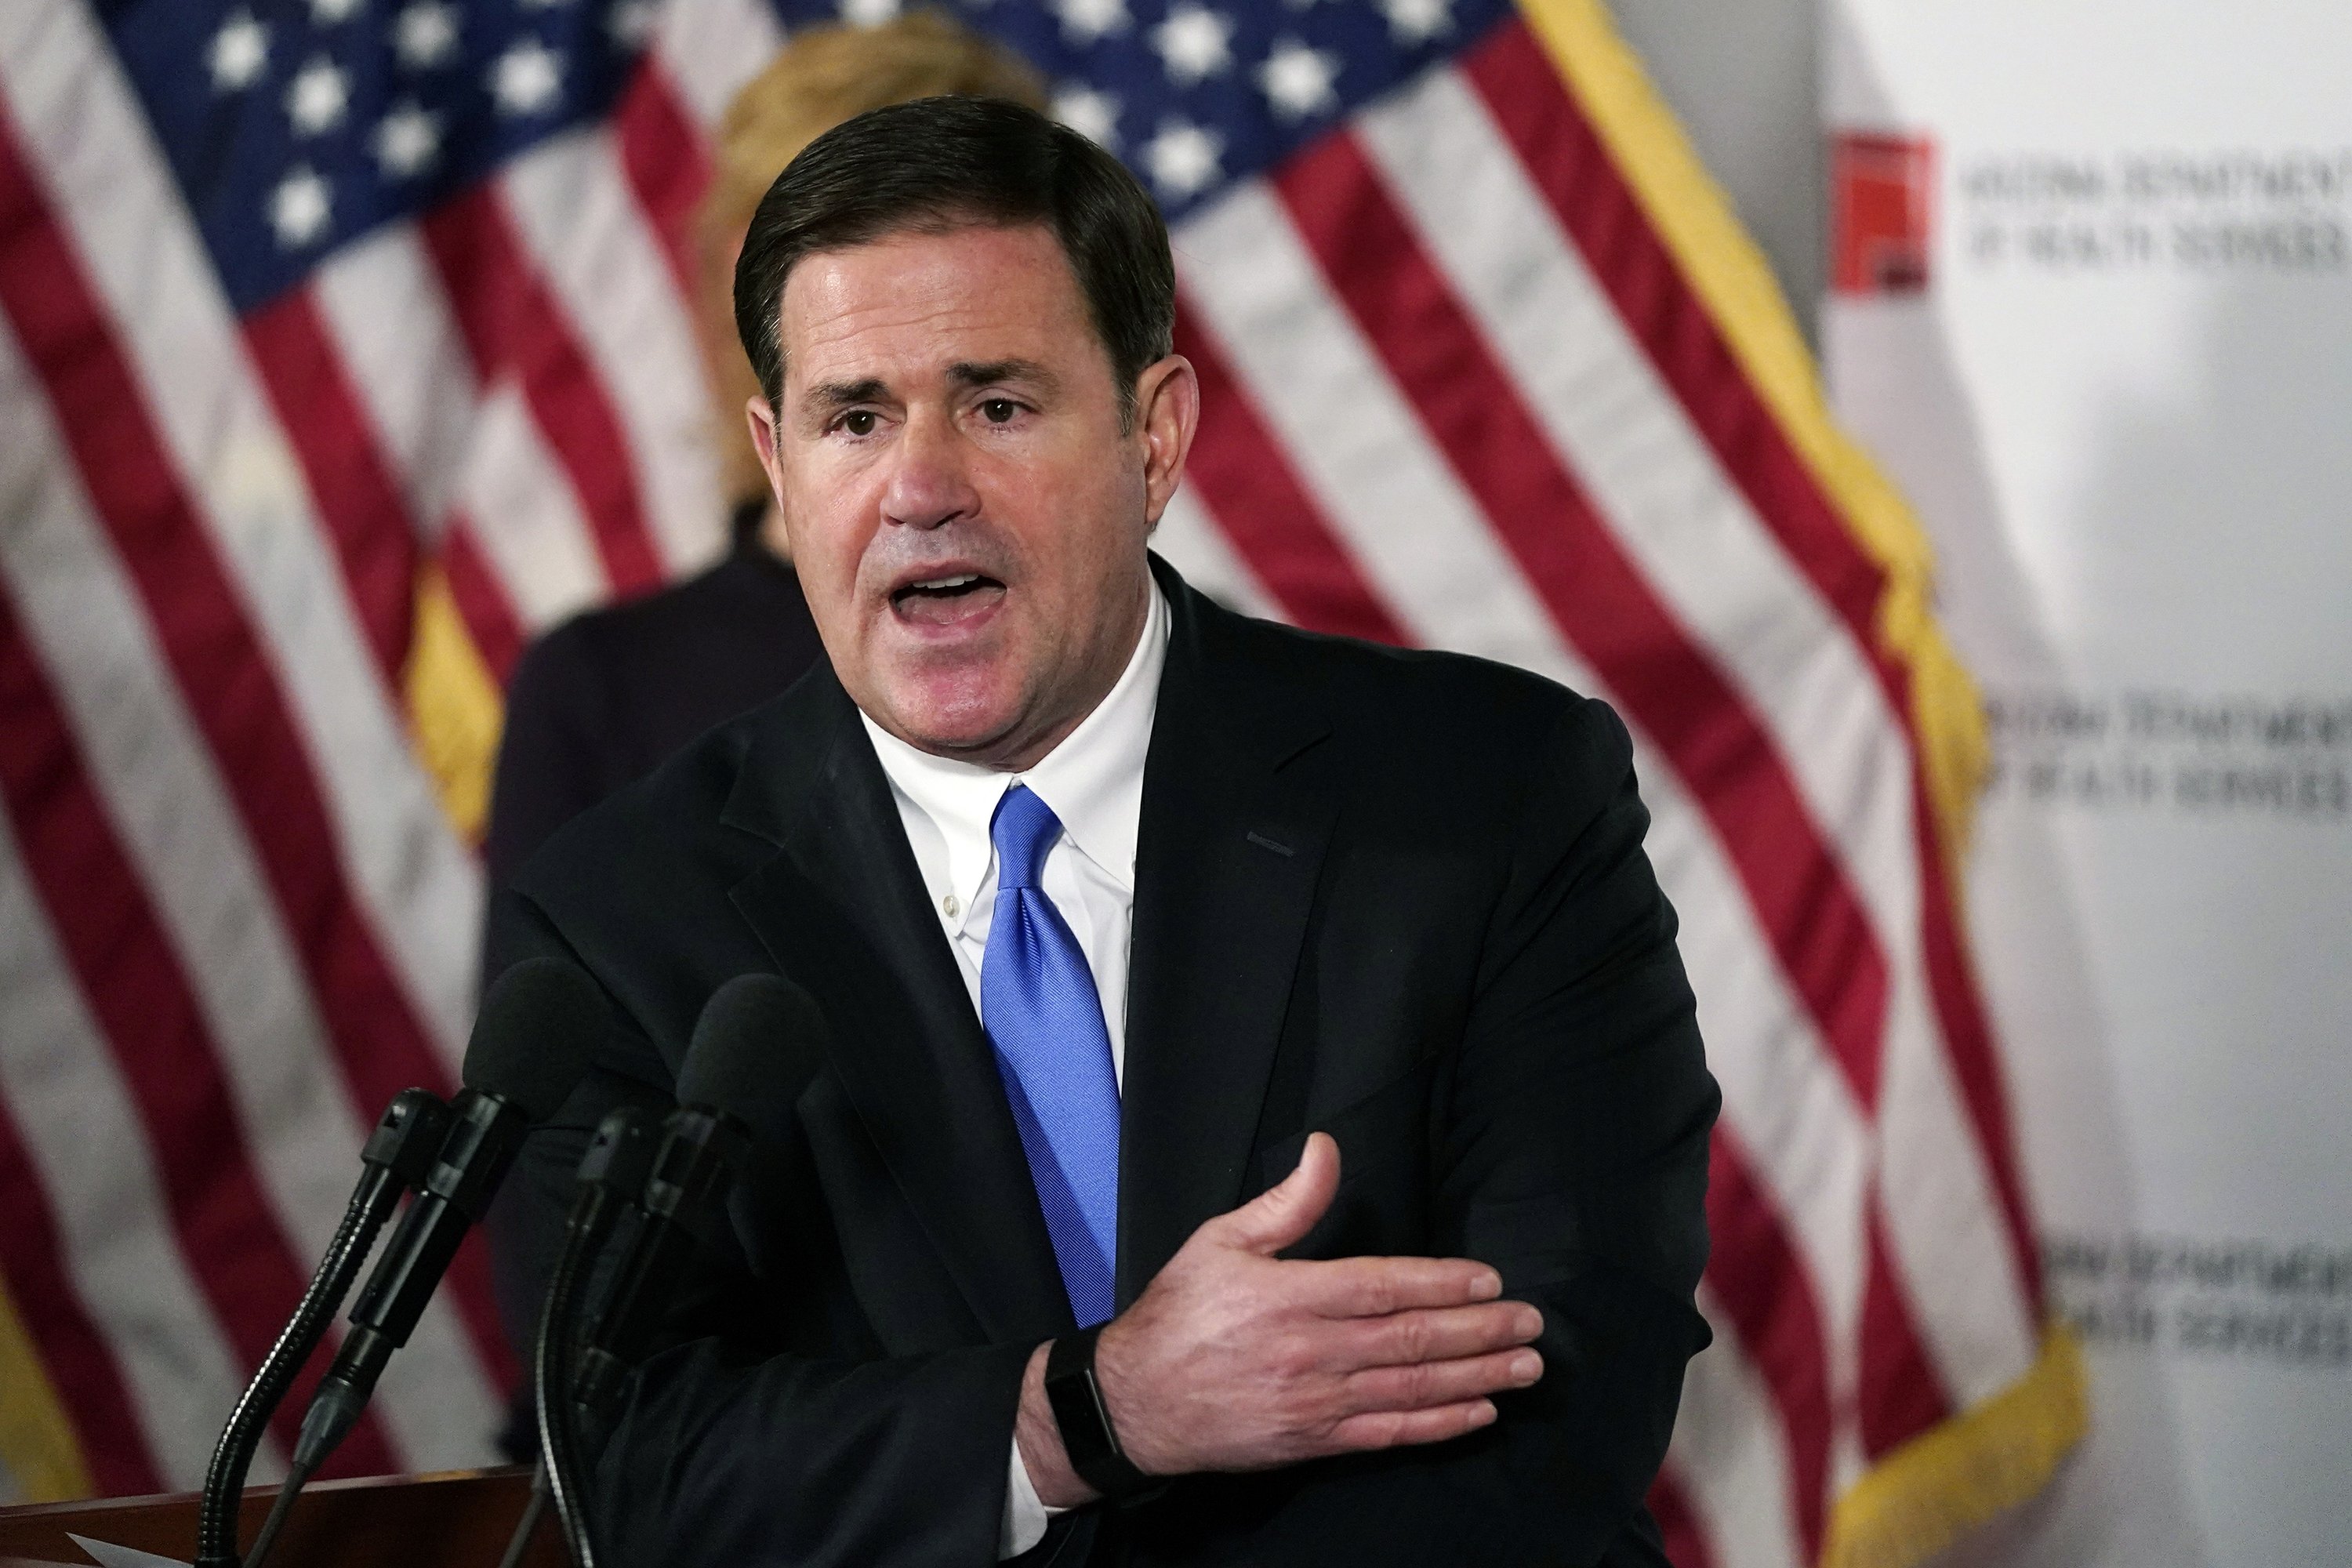 Ducey sneers at the new educational tax, promises quick fix